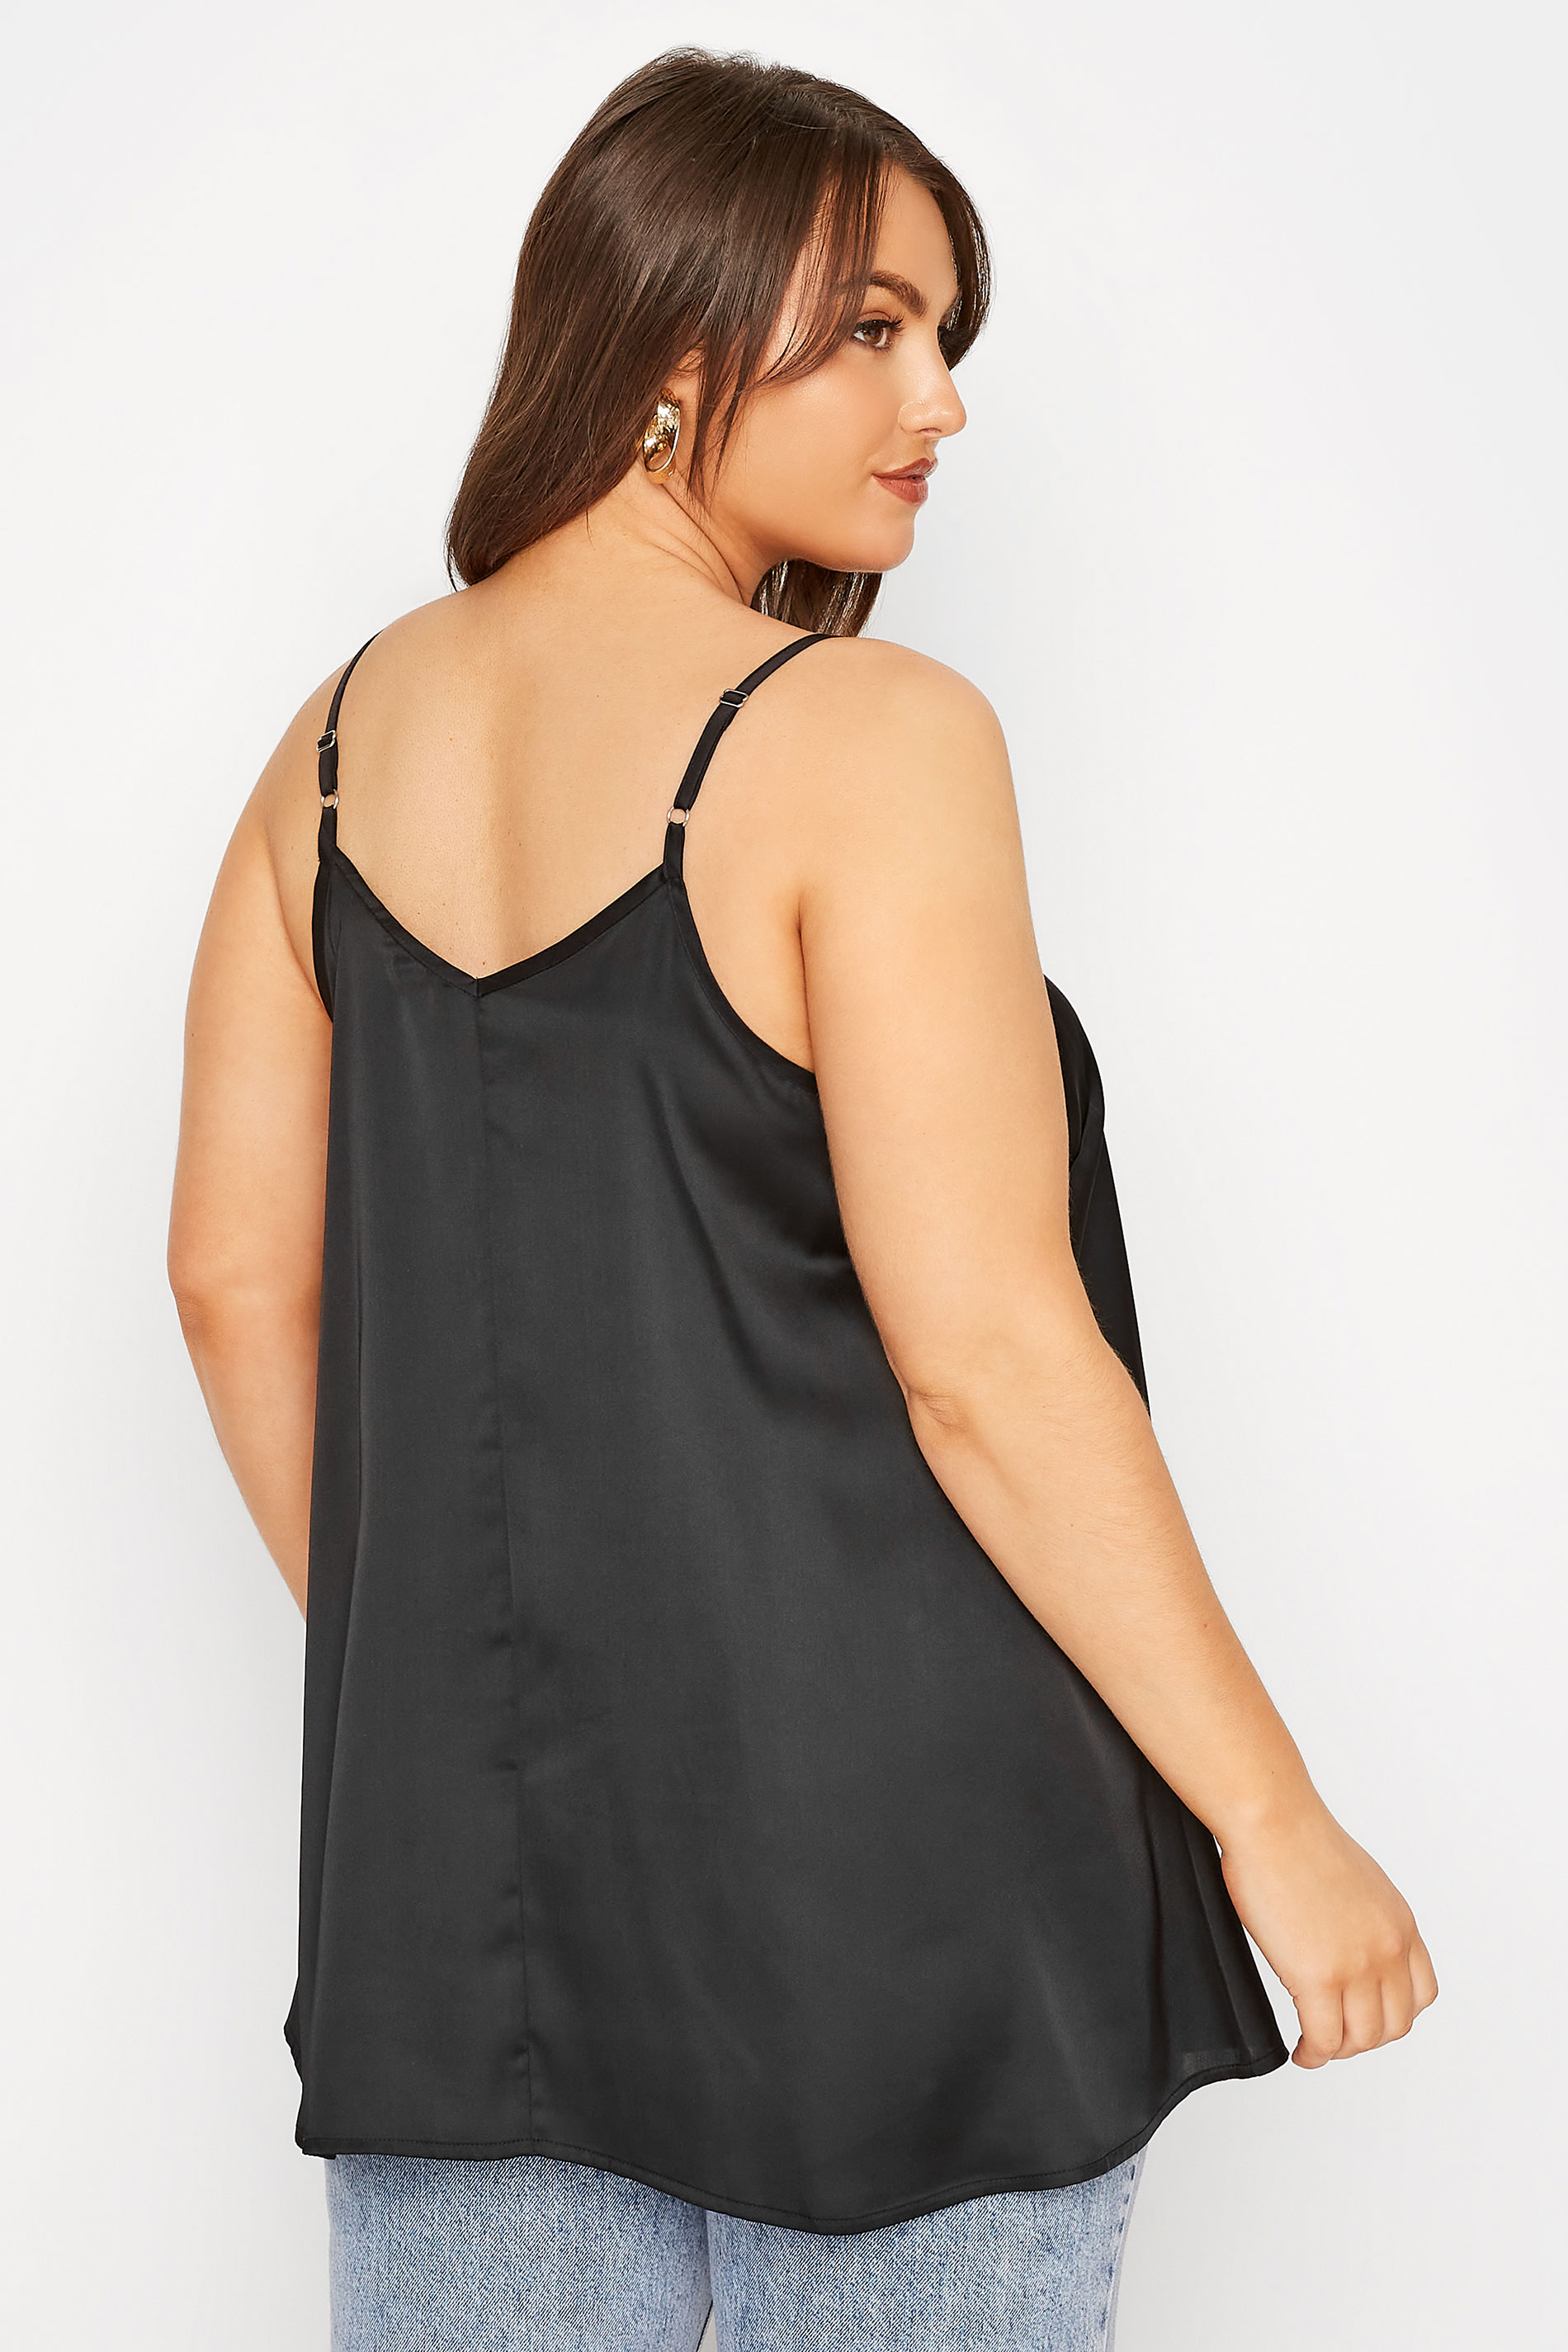 LIMITED COLLECTION Plus Size Black Satin Cami Top | Yours Clothing  3